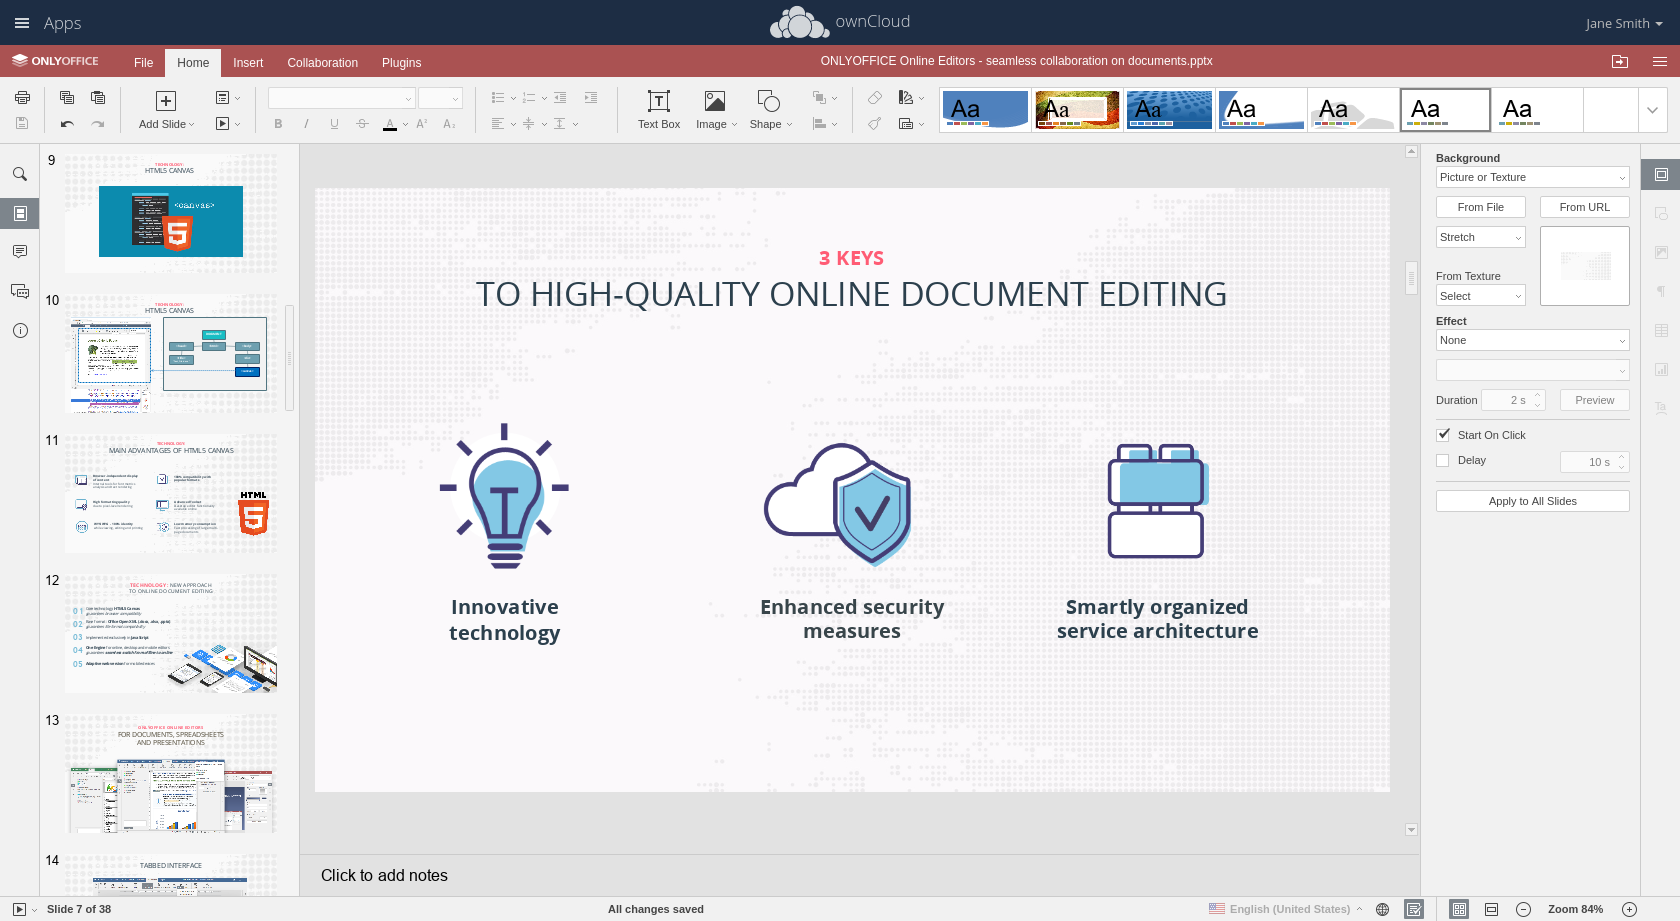 ONLYOFFICE presentation editor within ownCloud